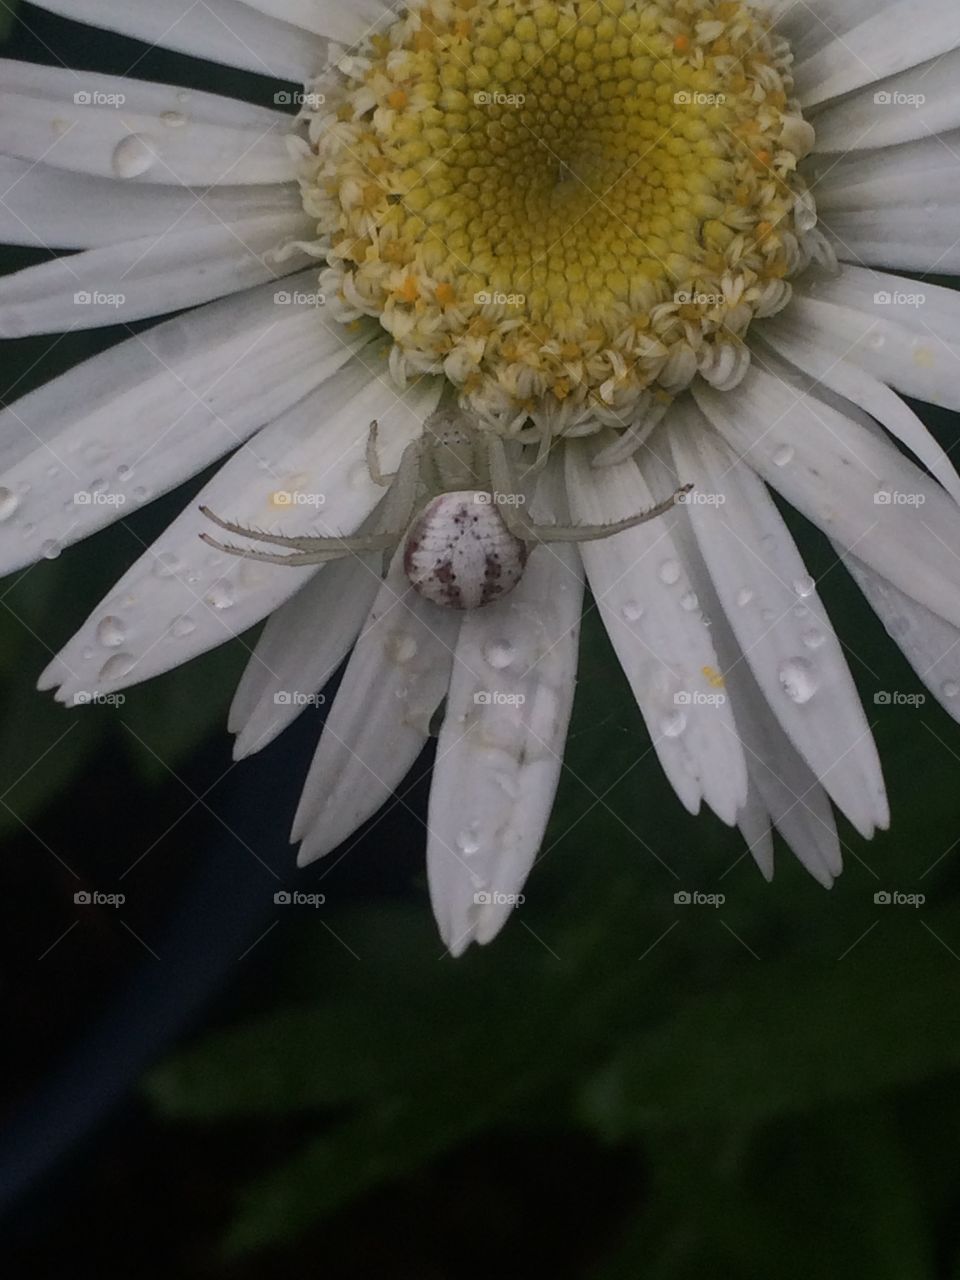 Spider on Daisy. A white garden spider on a white Shasta daisy, right after a storm.